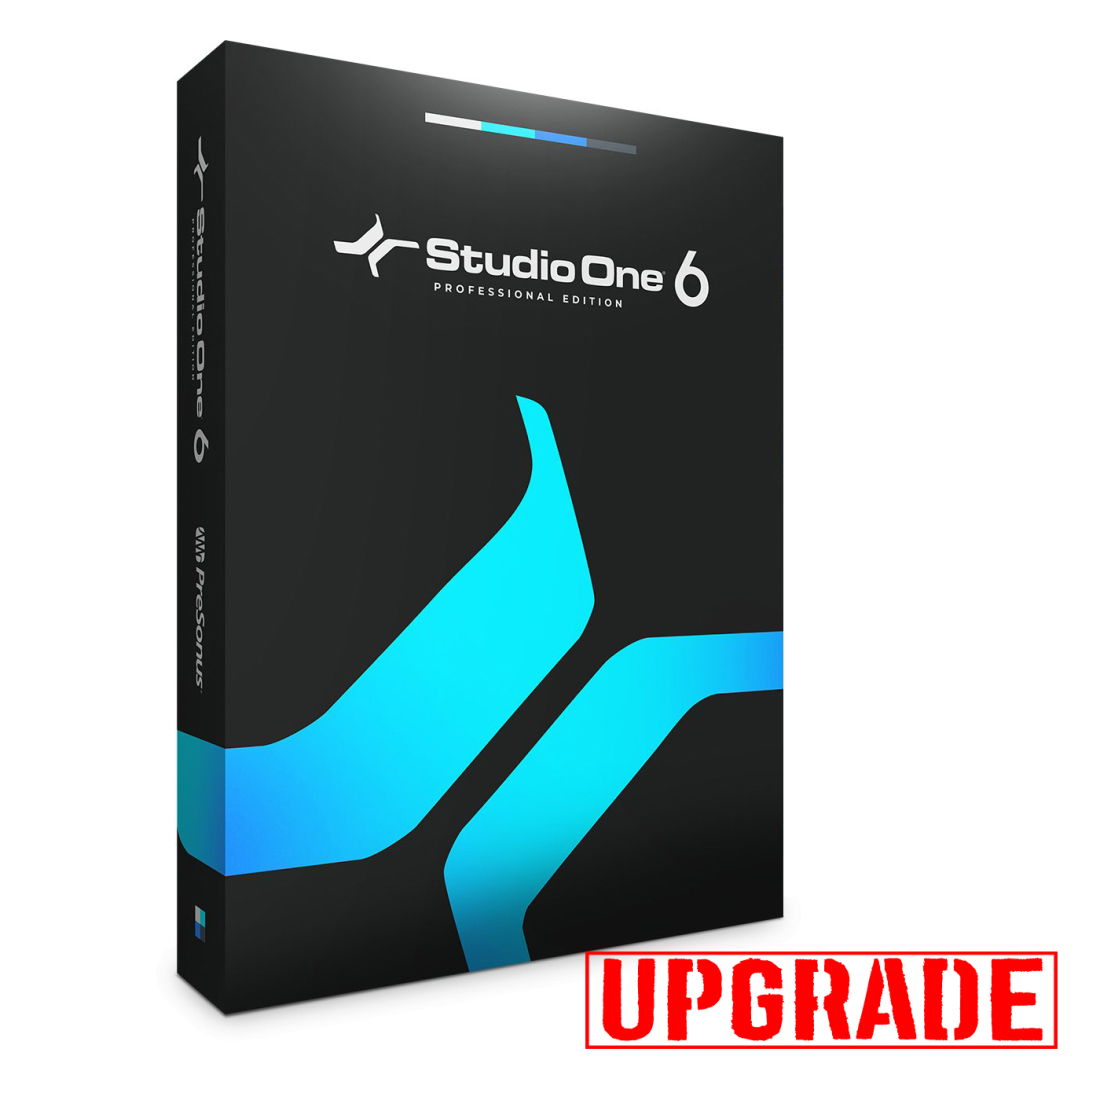 Studio One 5 Professional Edition to Studio One 6 Professional Edition, Upgrade - Download